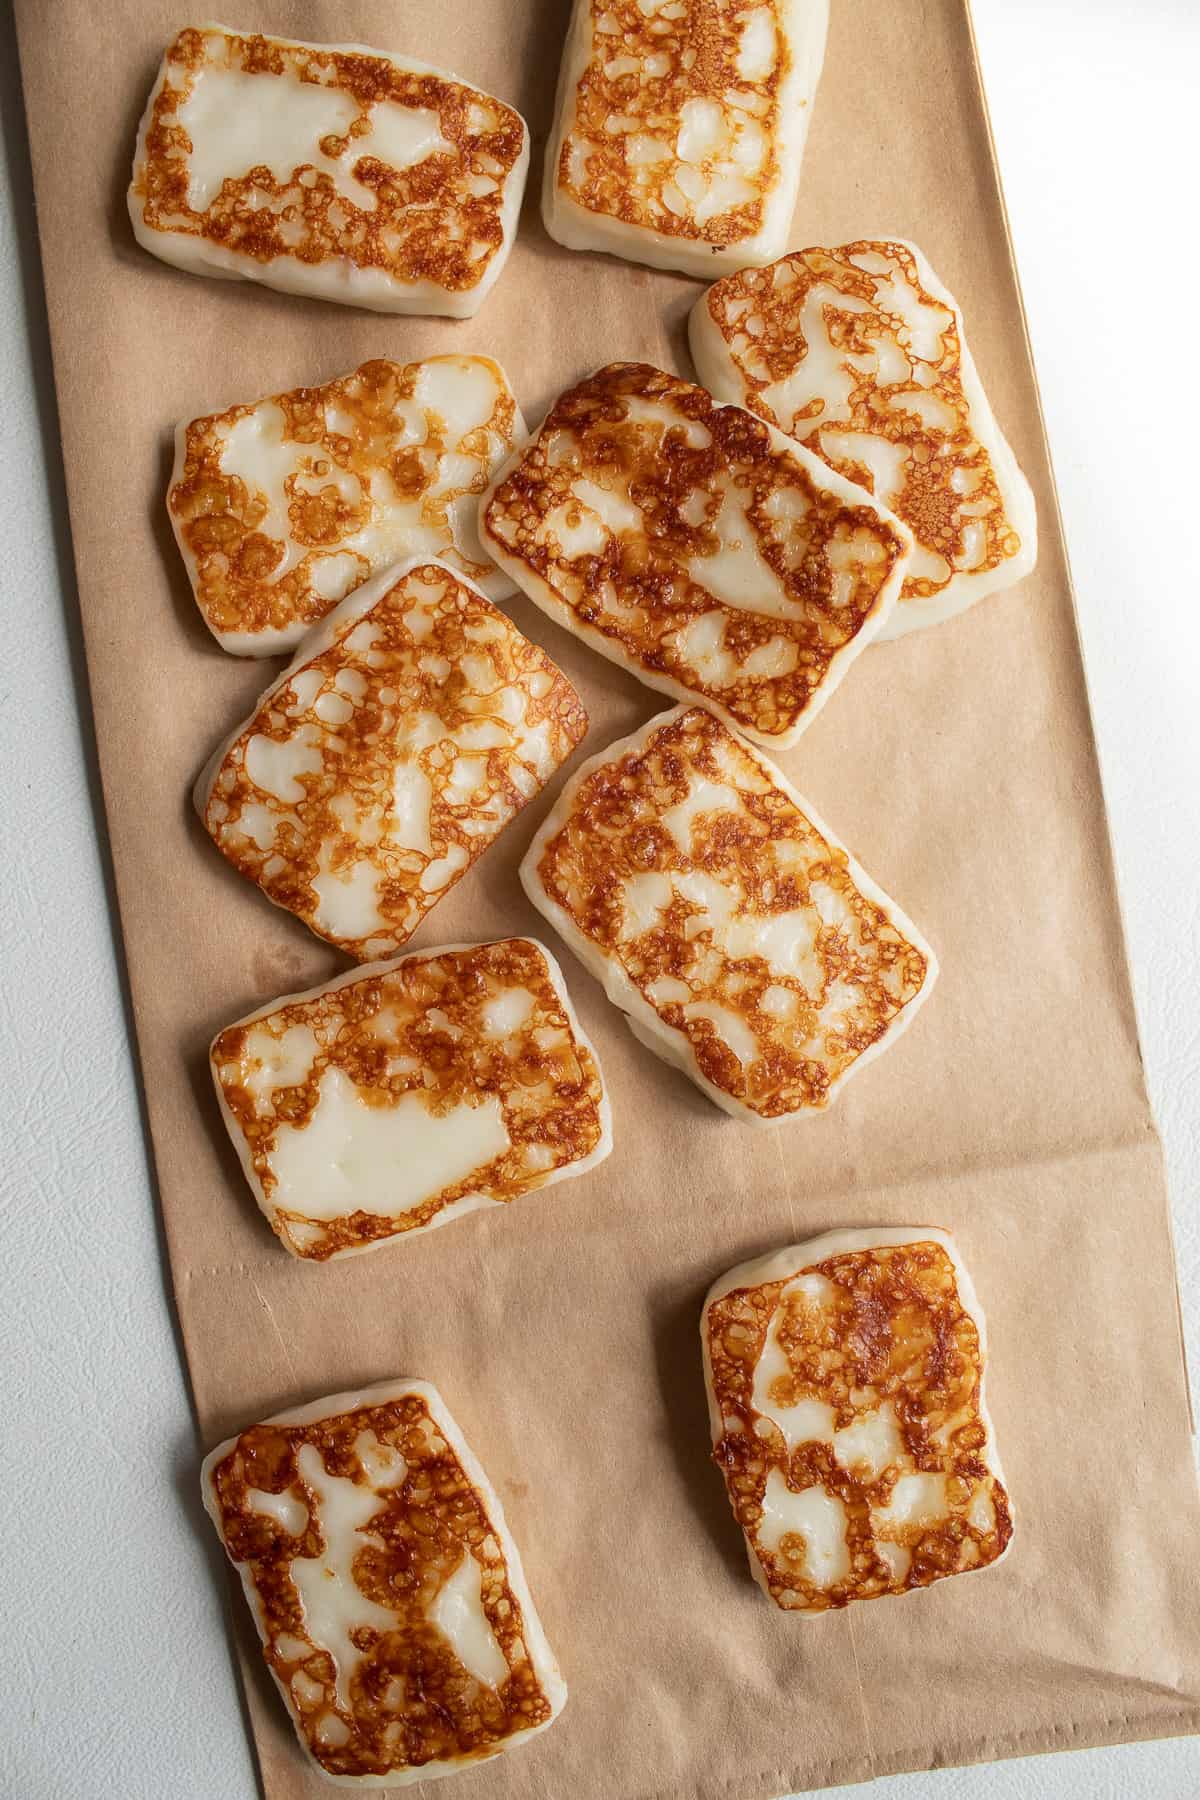 Fried halloumi pieces draining on a brown paper bag.